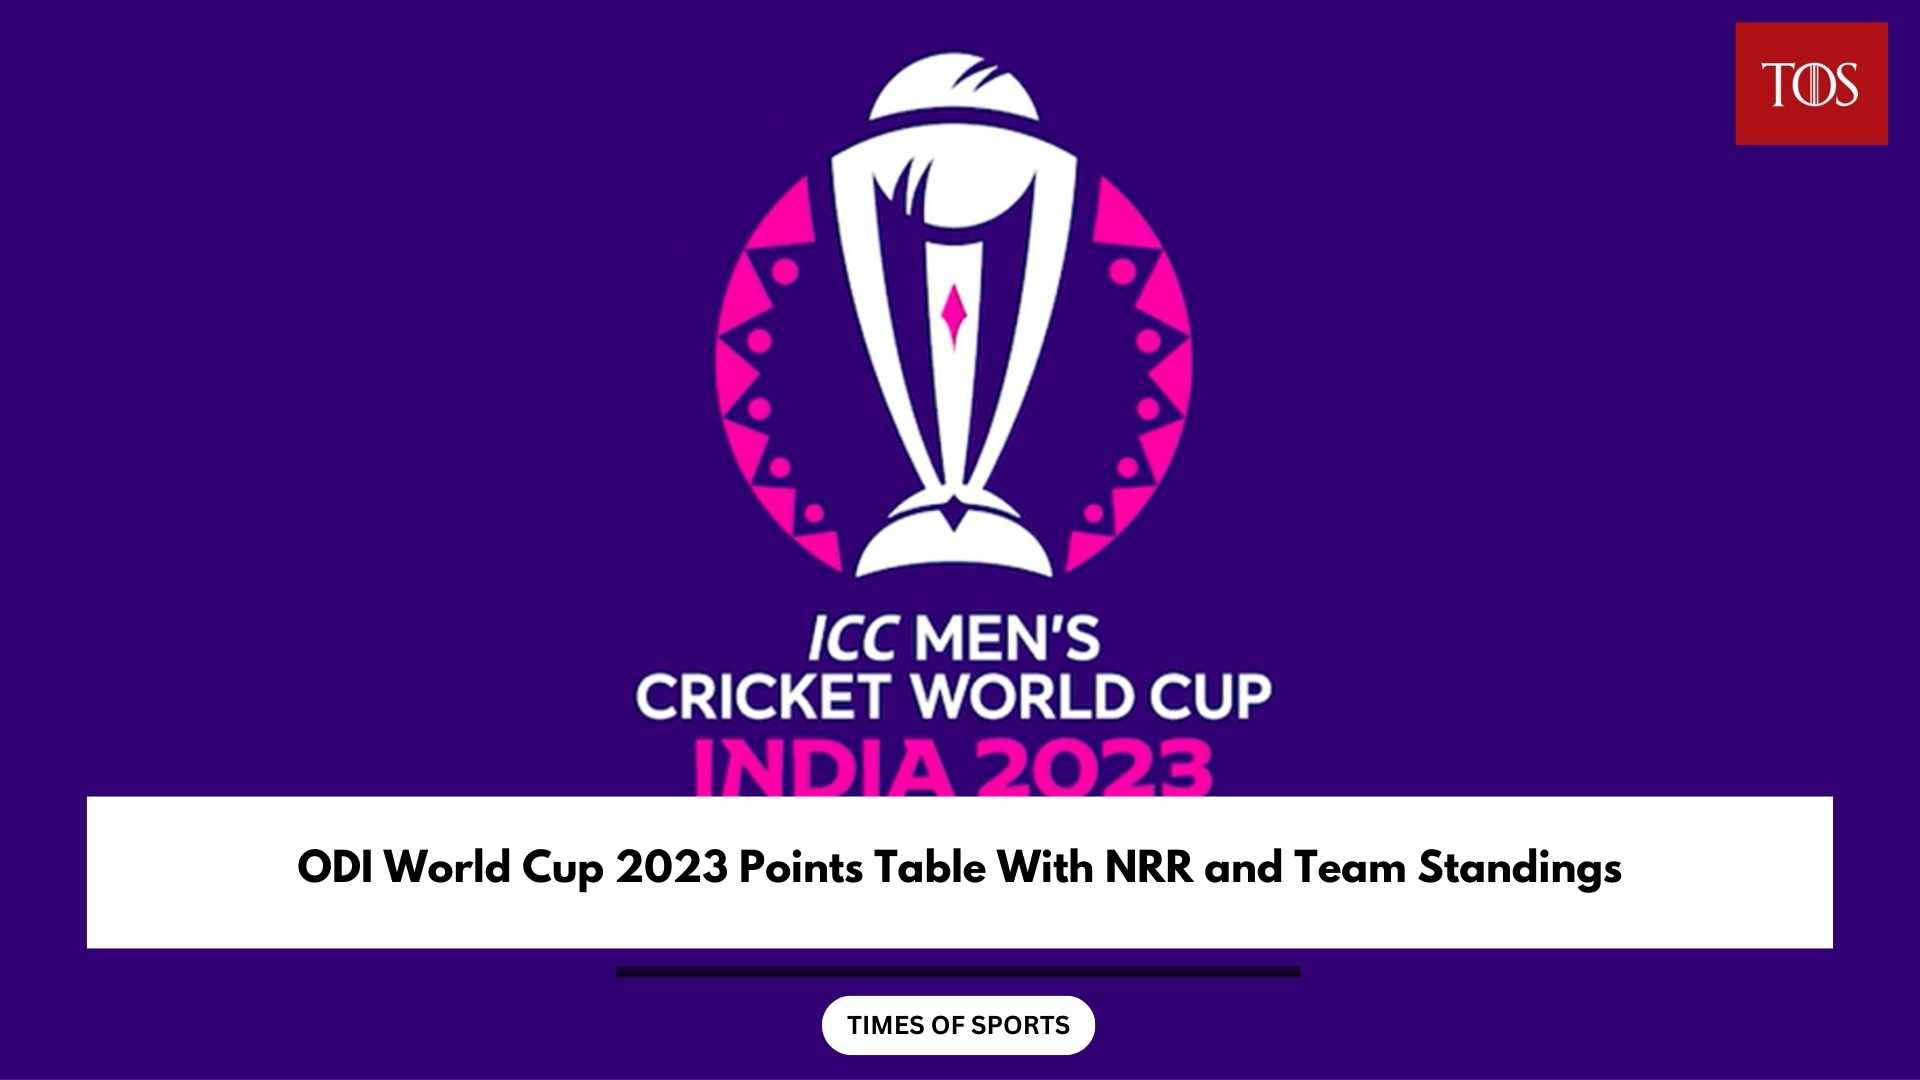 Odi World Cup 2023 Points Table With